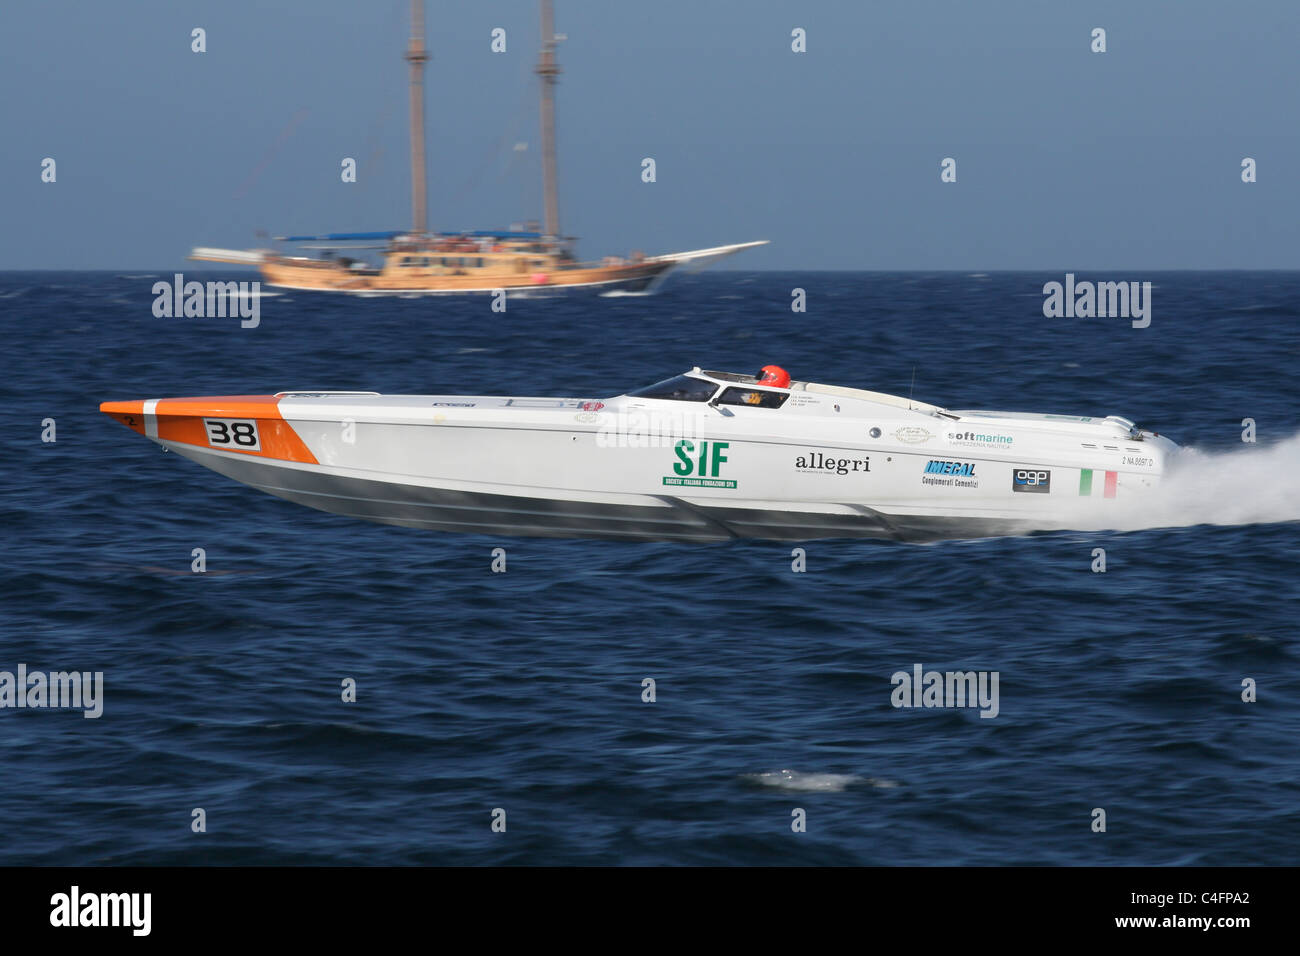 Supersport class boat no. 38 SIF during the UIM Ocean Grand Prix sprint race, Malta, 11 June 2011 Stock Photo